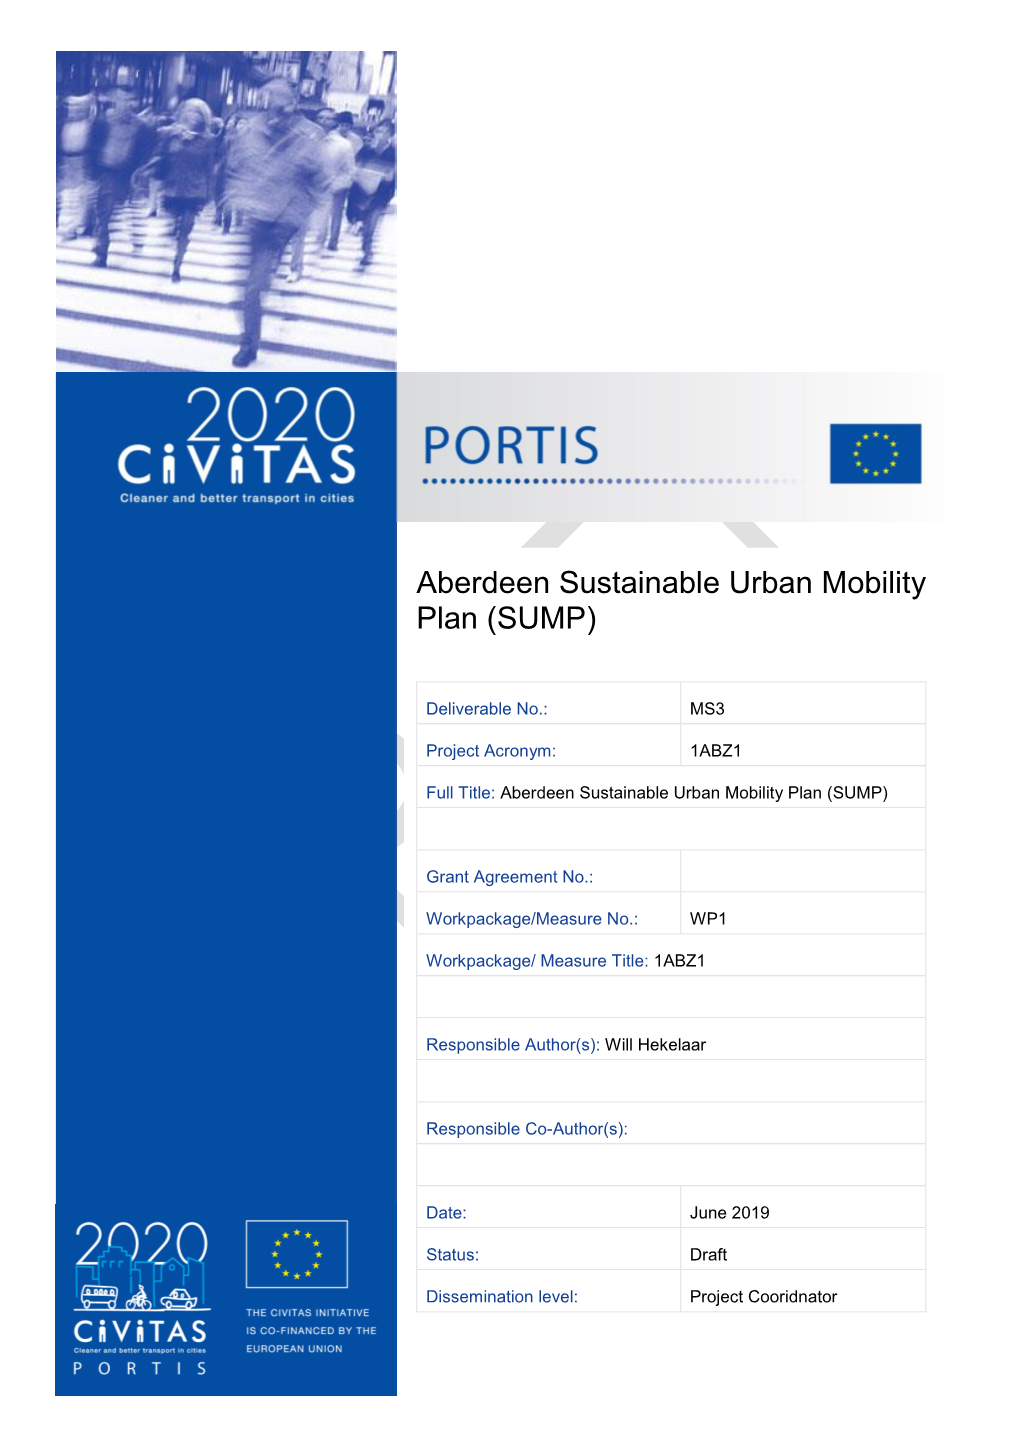 SUMP (Sustainable Urban Mobility Plan)